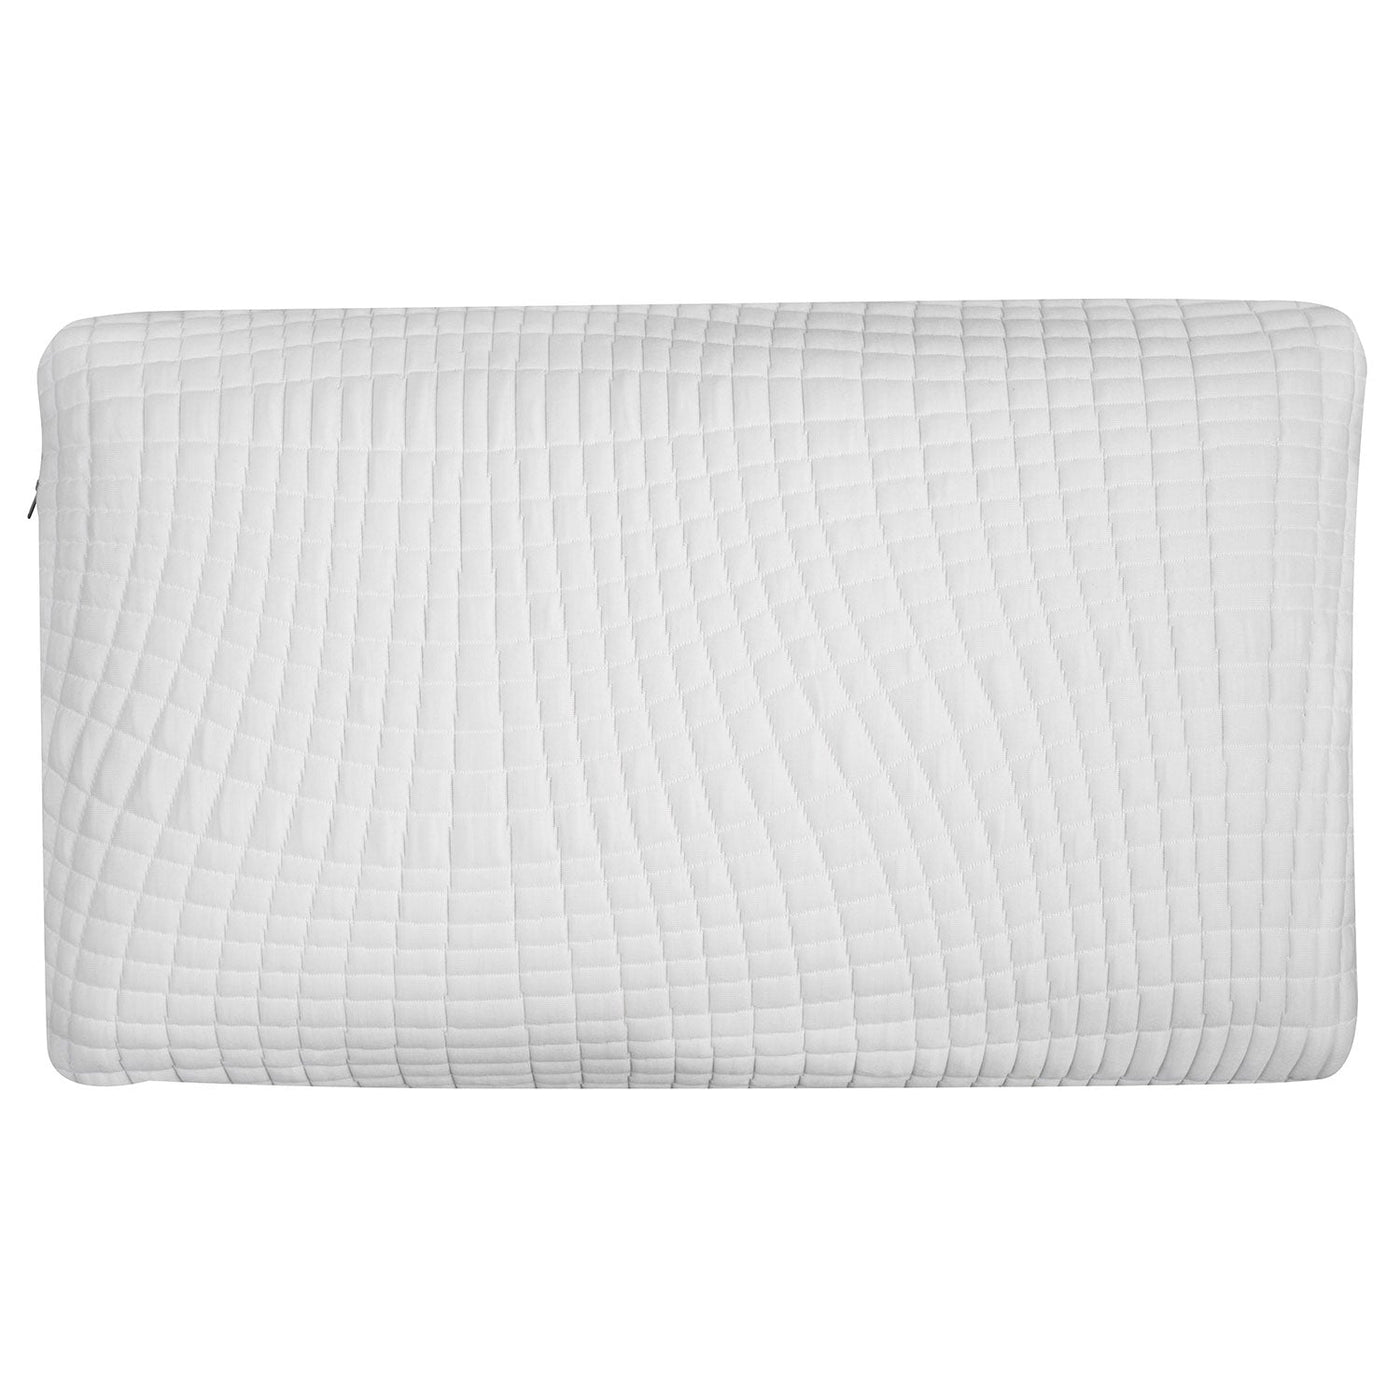 Ventilated Charcoal Bamboo Infused Memory Foam Pillow - Washable Cover - mysleepscience.com